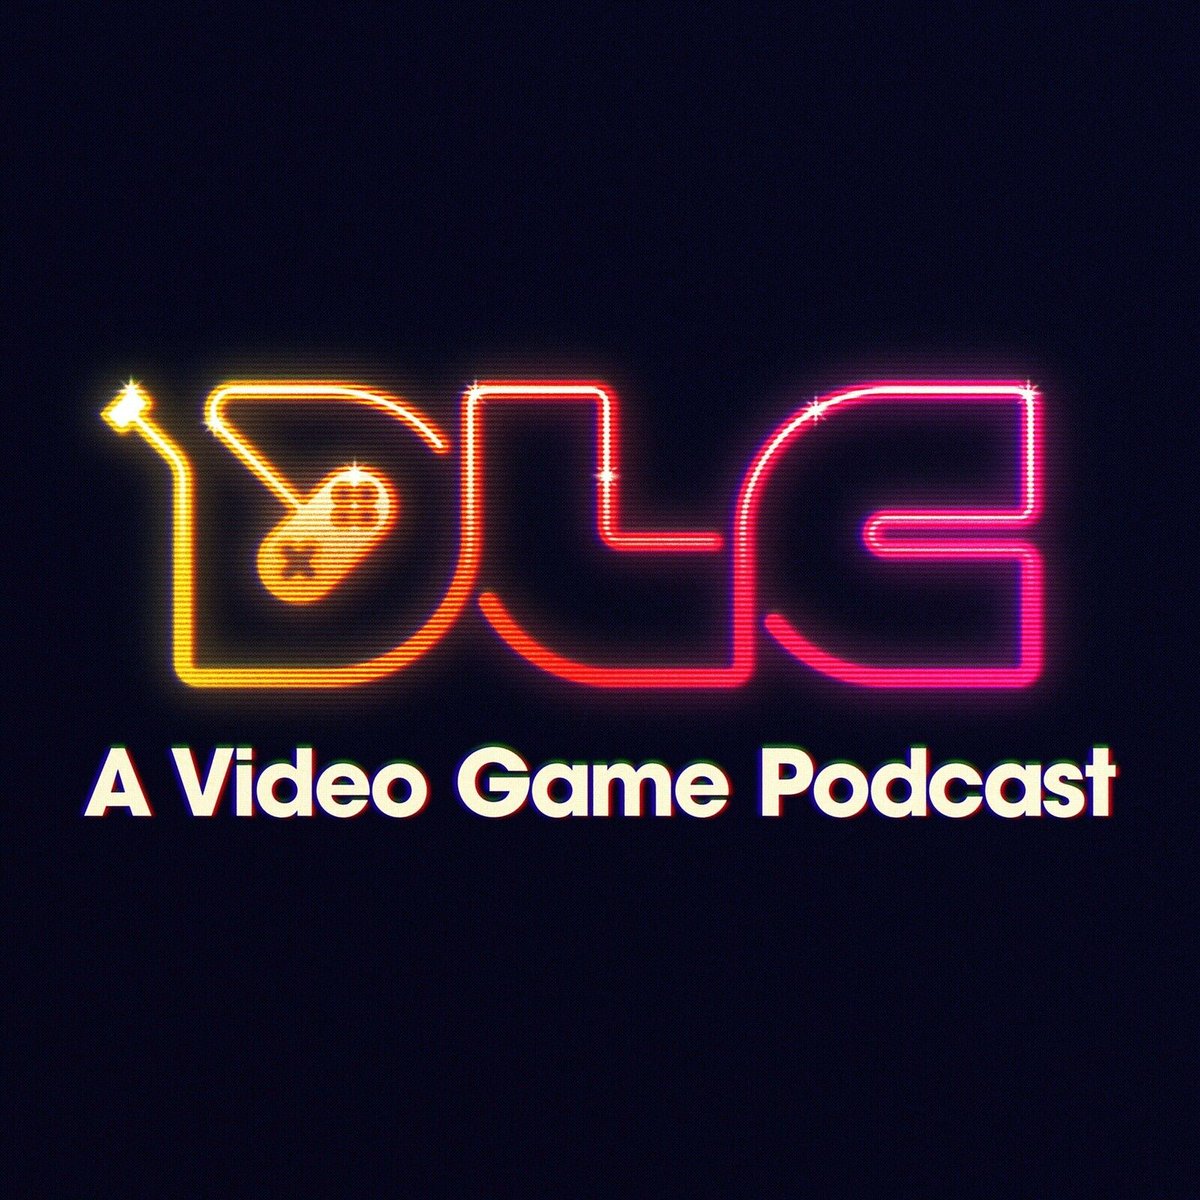 I was a guest on the DLC podcast with @spicer and @jeffcannata to talk Top Spin, Final Fantasy VII Rebirth, and what the hell their daily schedules are like. podcasts.apple.com/us/podcast/dlc…